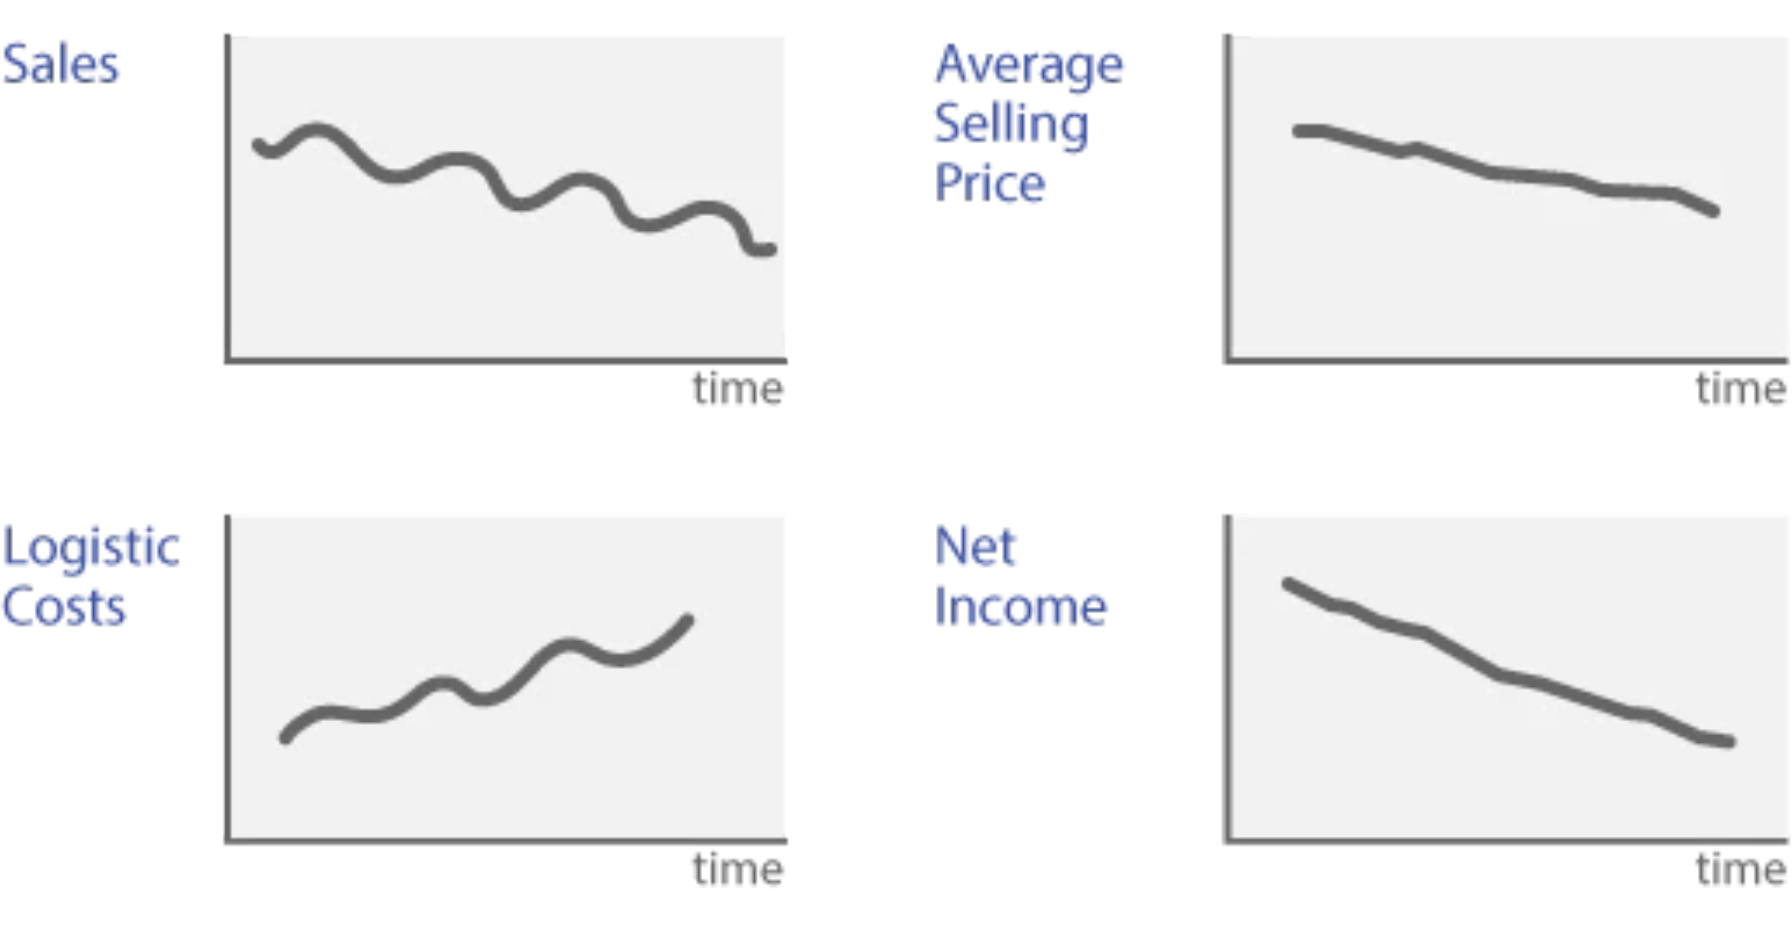 Example of graphing indicators of behavioral patterns: includes "sales", "average selling price", "logistic costs", and "net income"